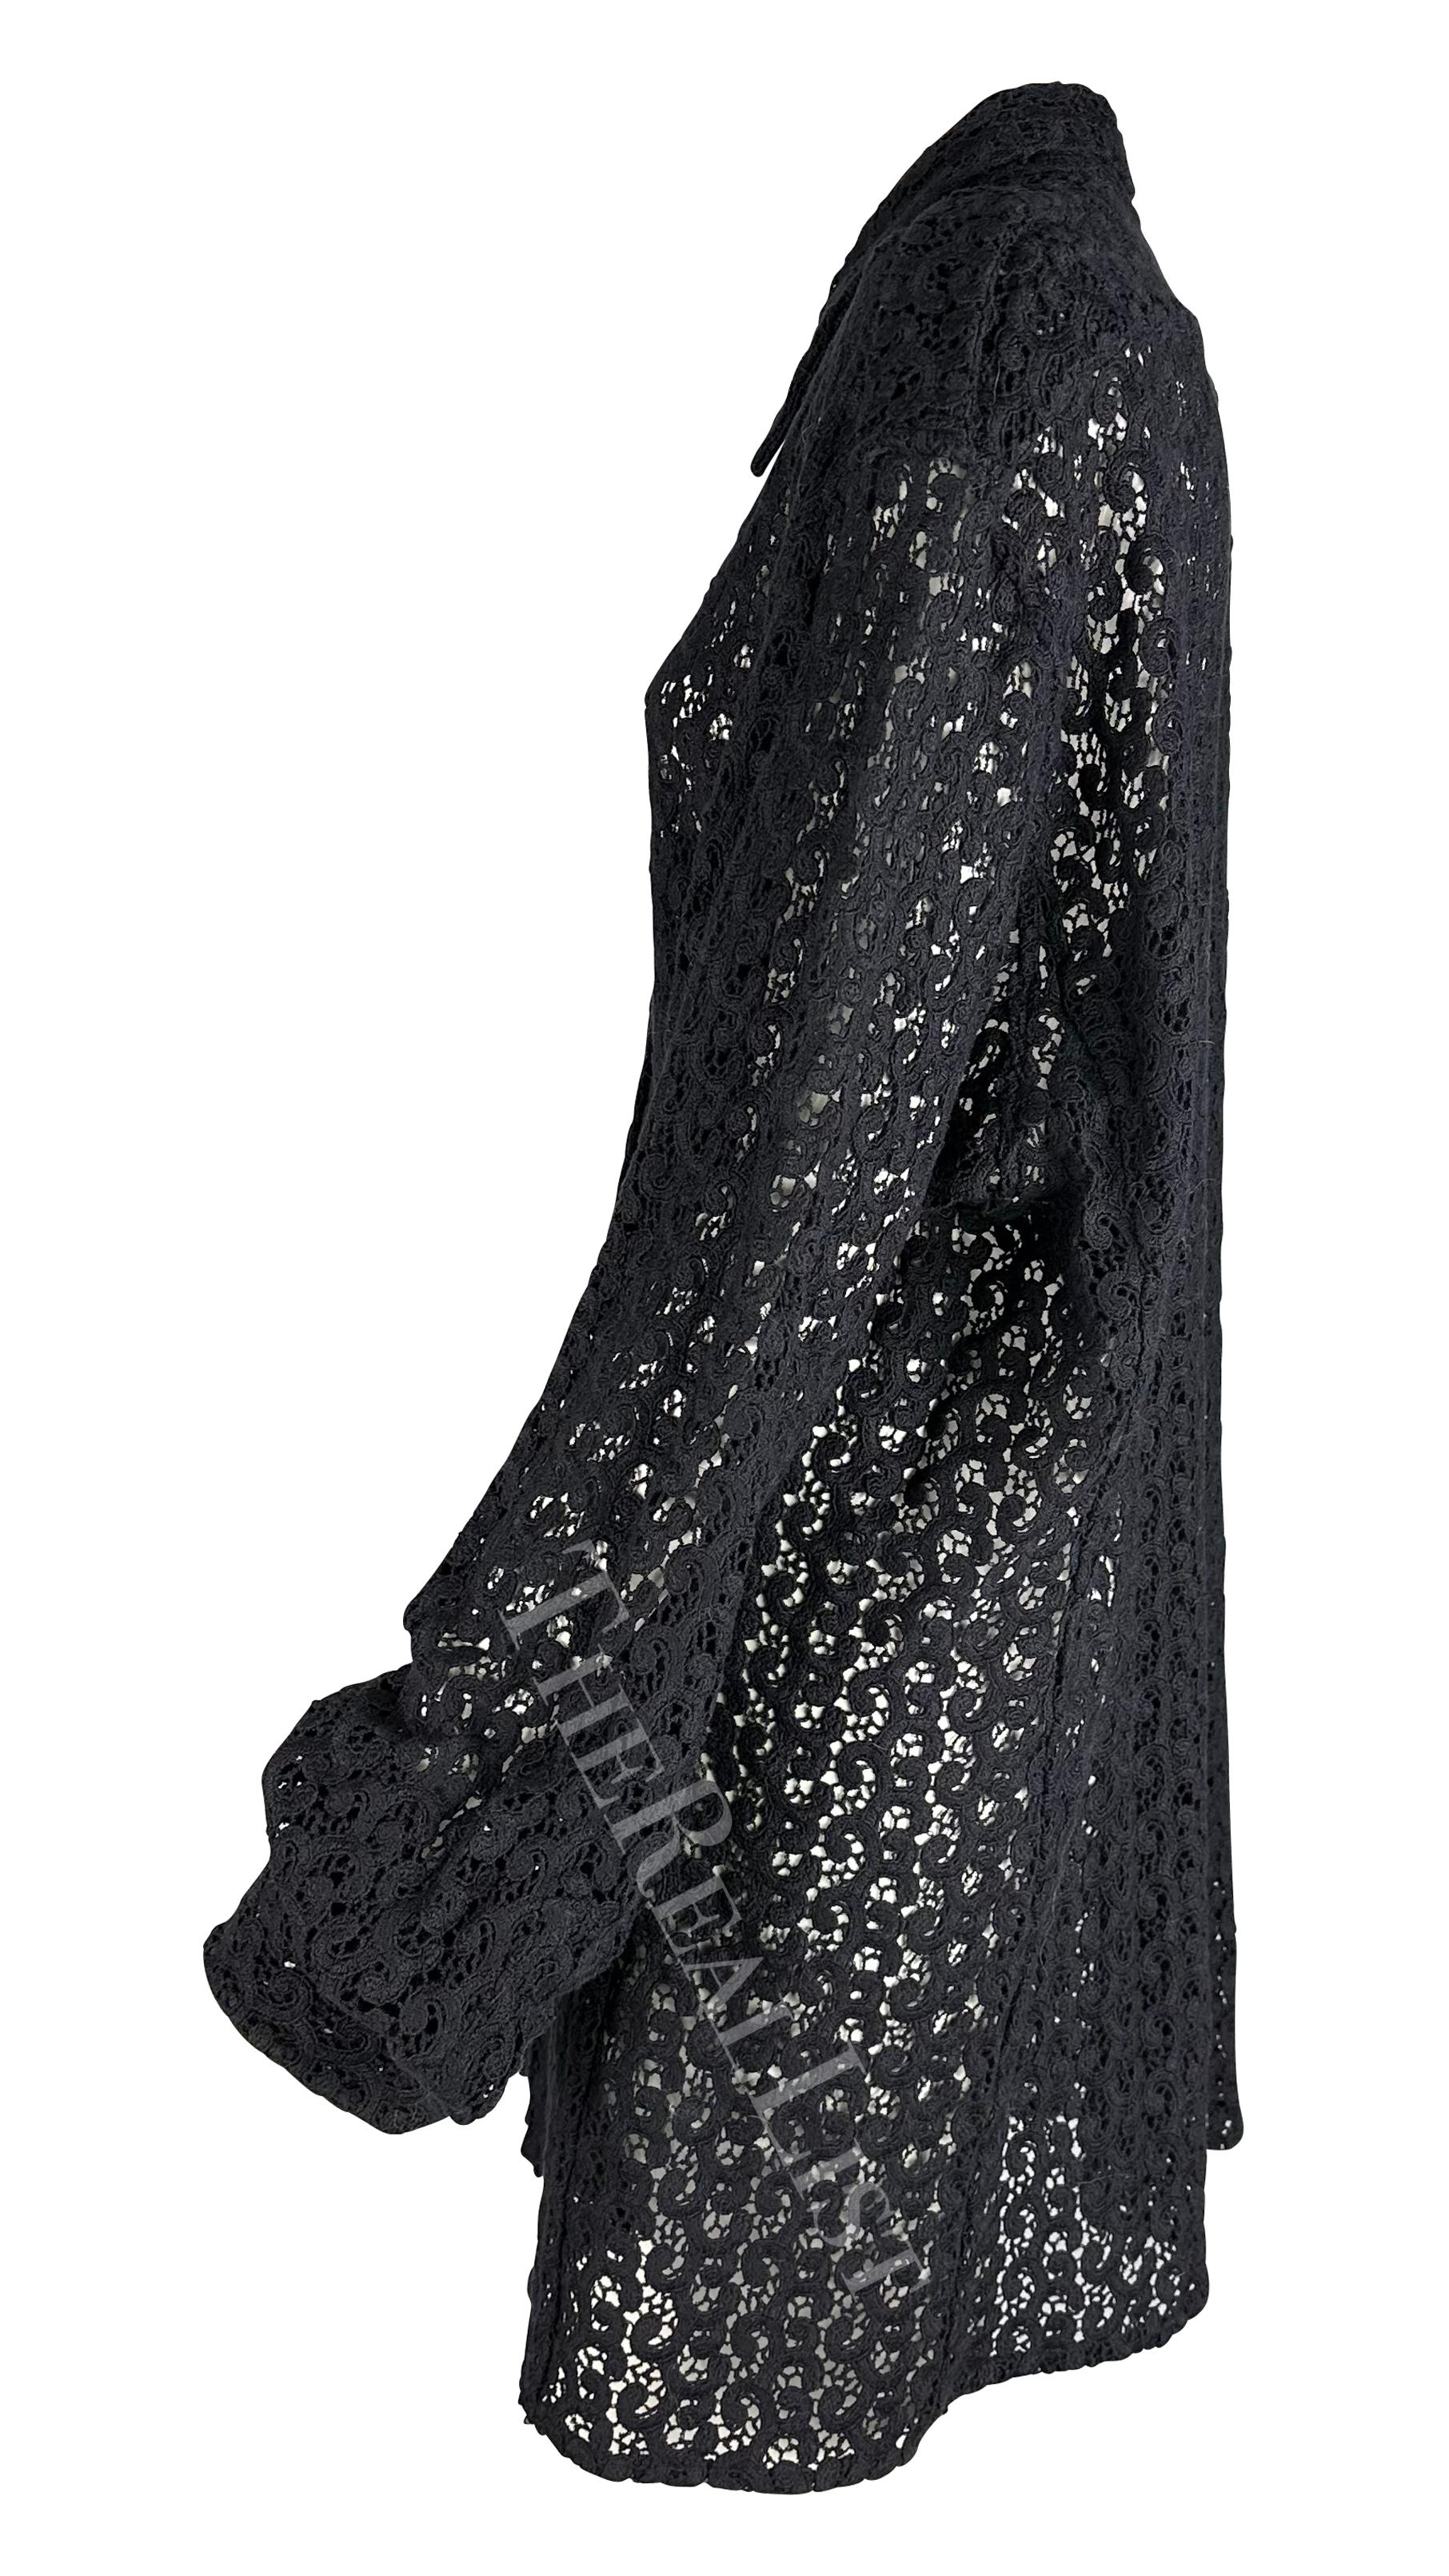 S/S 1996 Gucci by Tom Ford Men's Black Crochet Lace Oversized Sheer Shirt In Excellent Condition For Sale In West Hollywood, CA